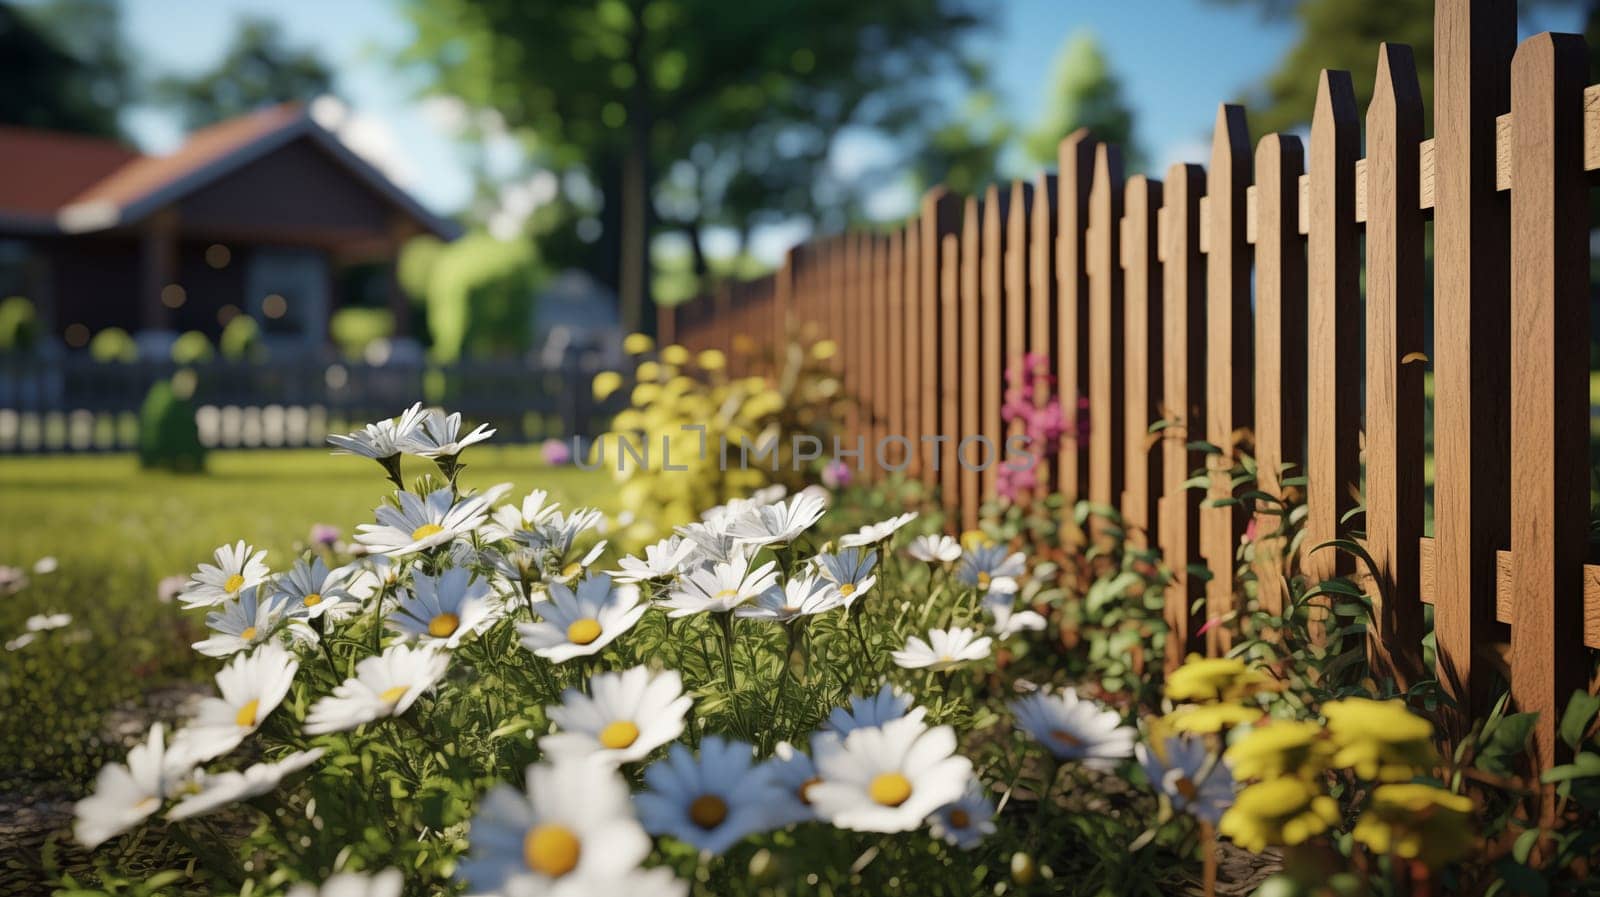 White flowers blooming along a wooden picket fence in a suburban setting with a house in the background by Zakharova